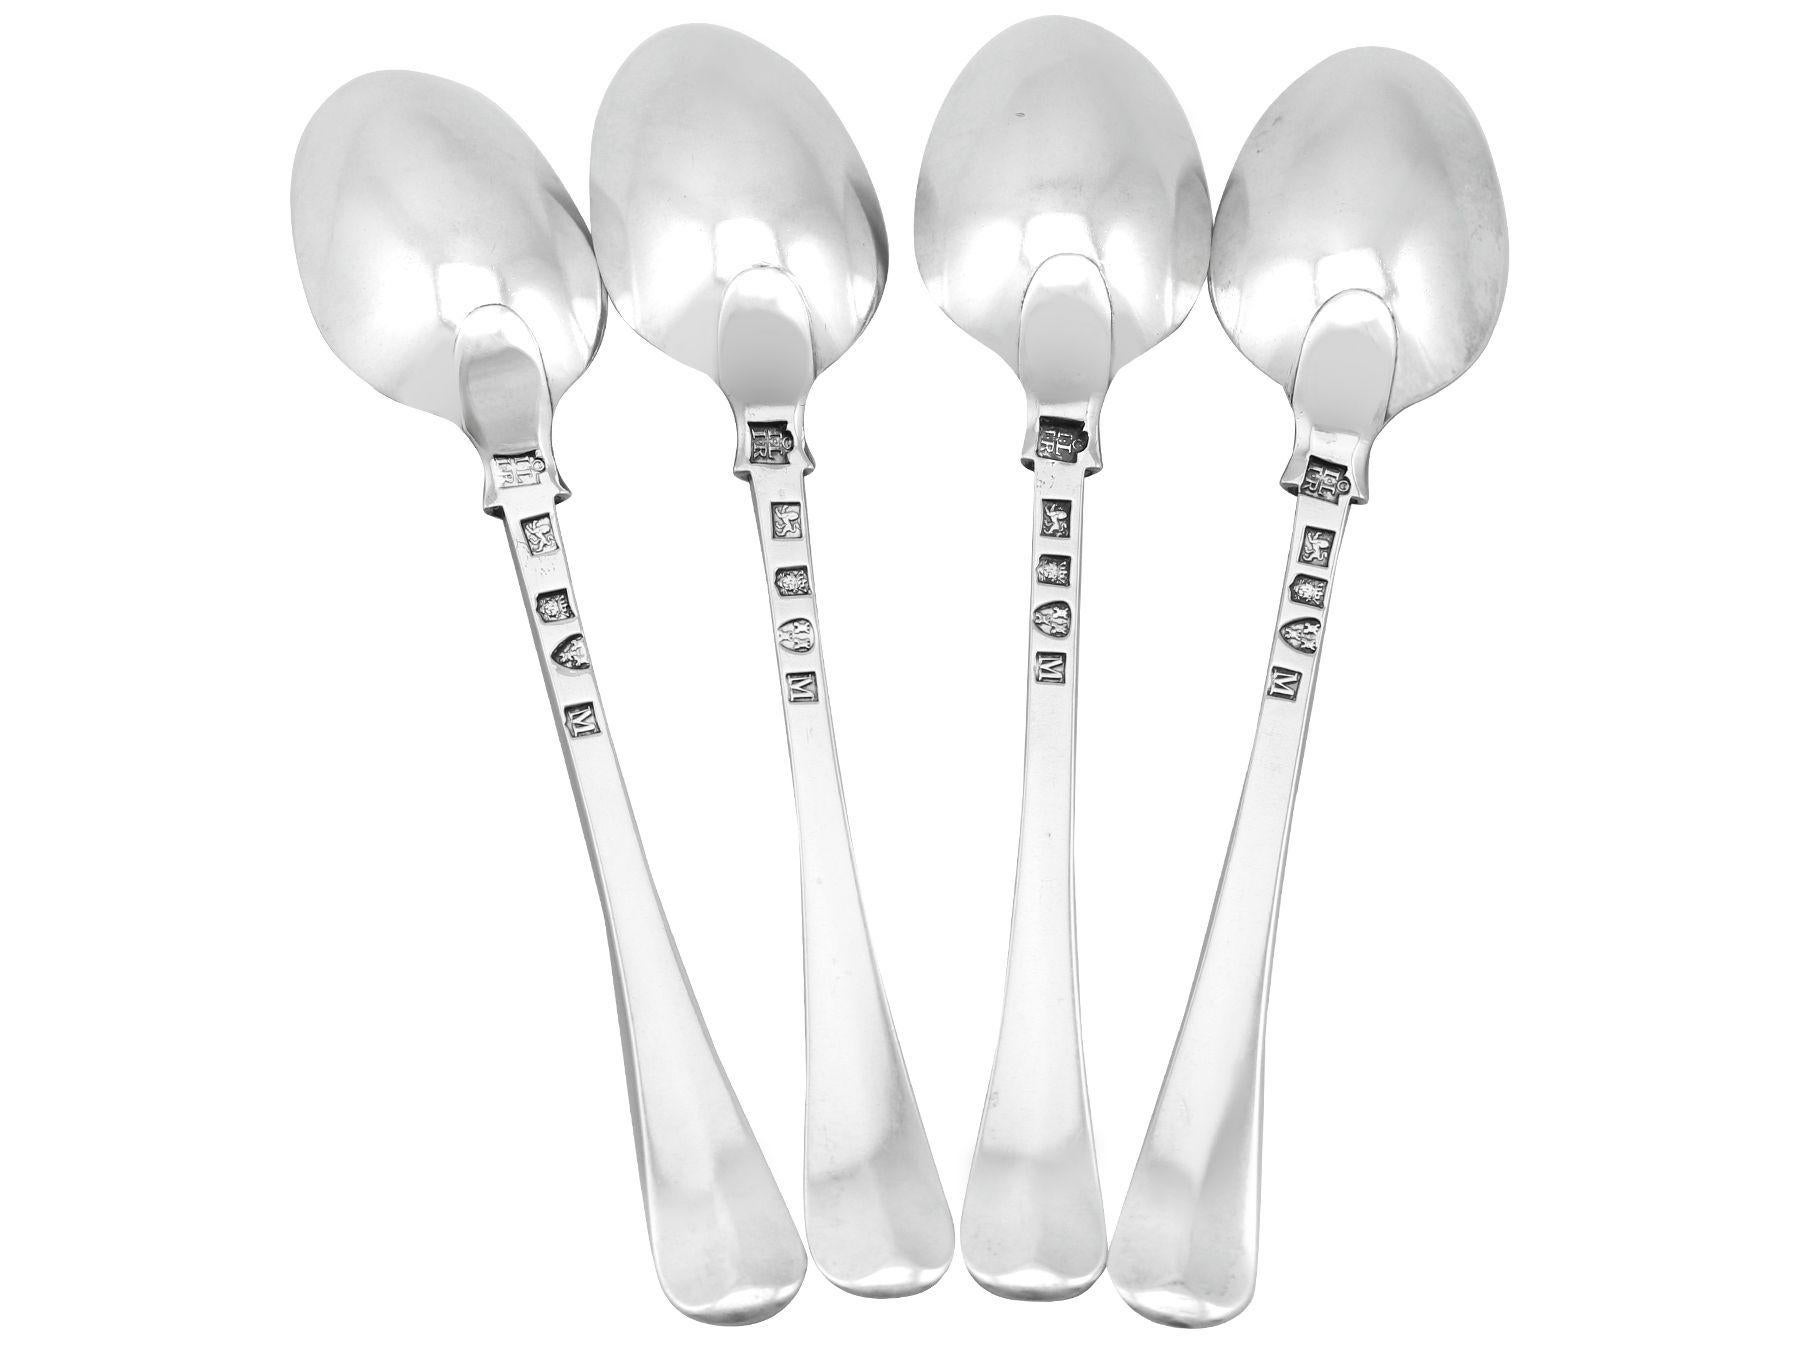 An exceptional, fine and impressive set of four antique Georgian Newcastle sterling silver Old English pattern table/serving spoons; an addition to our silver flatware collection

These exceptional antique Georgian Newcastle sterling silver spoons